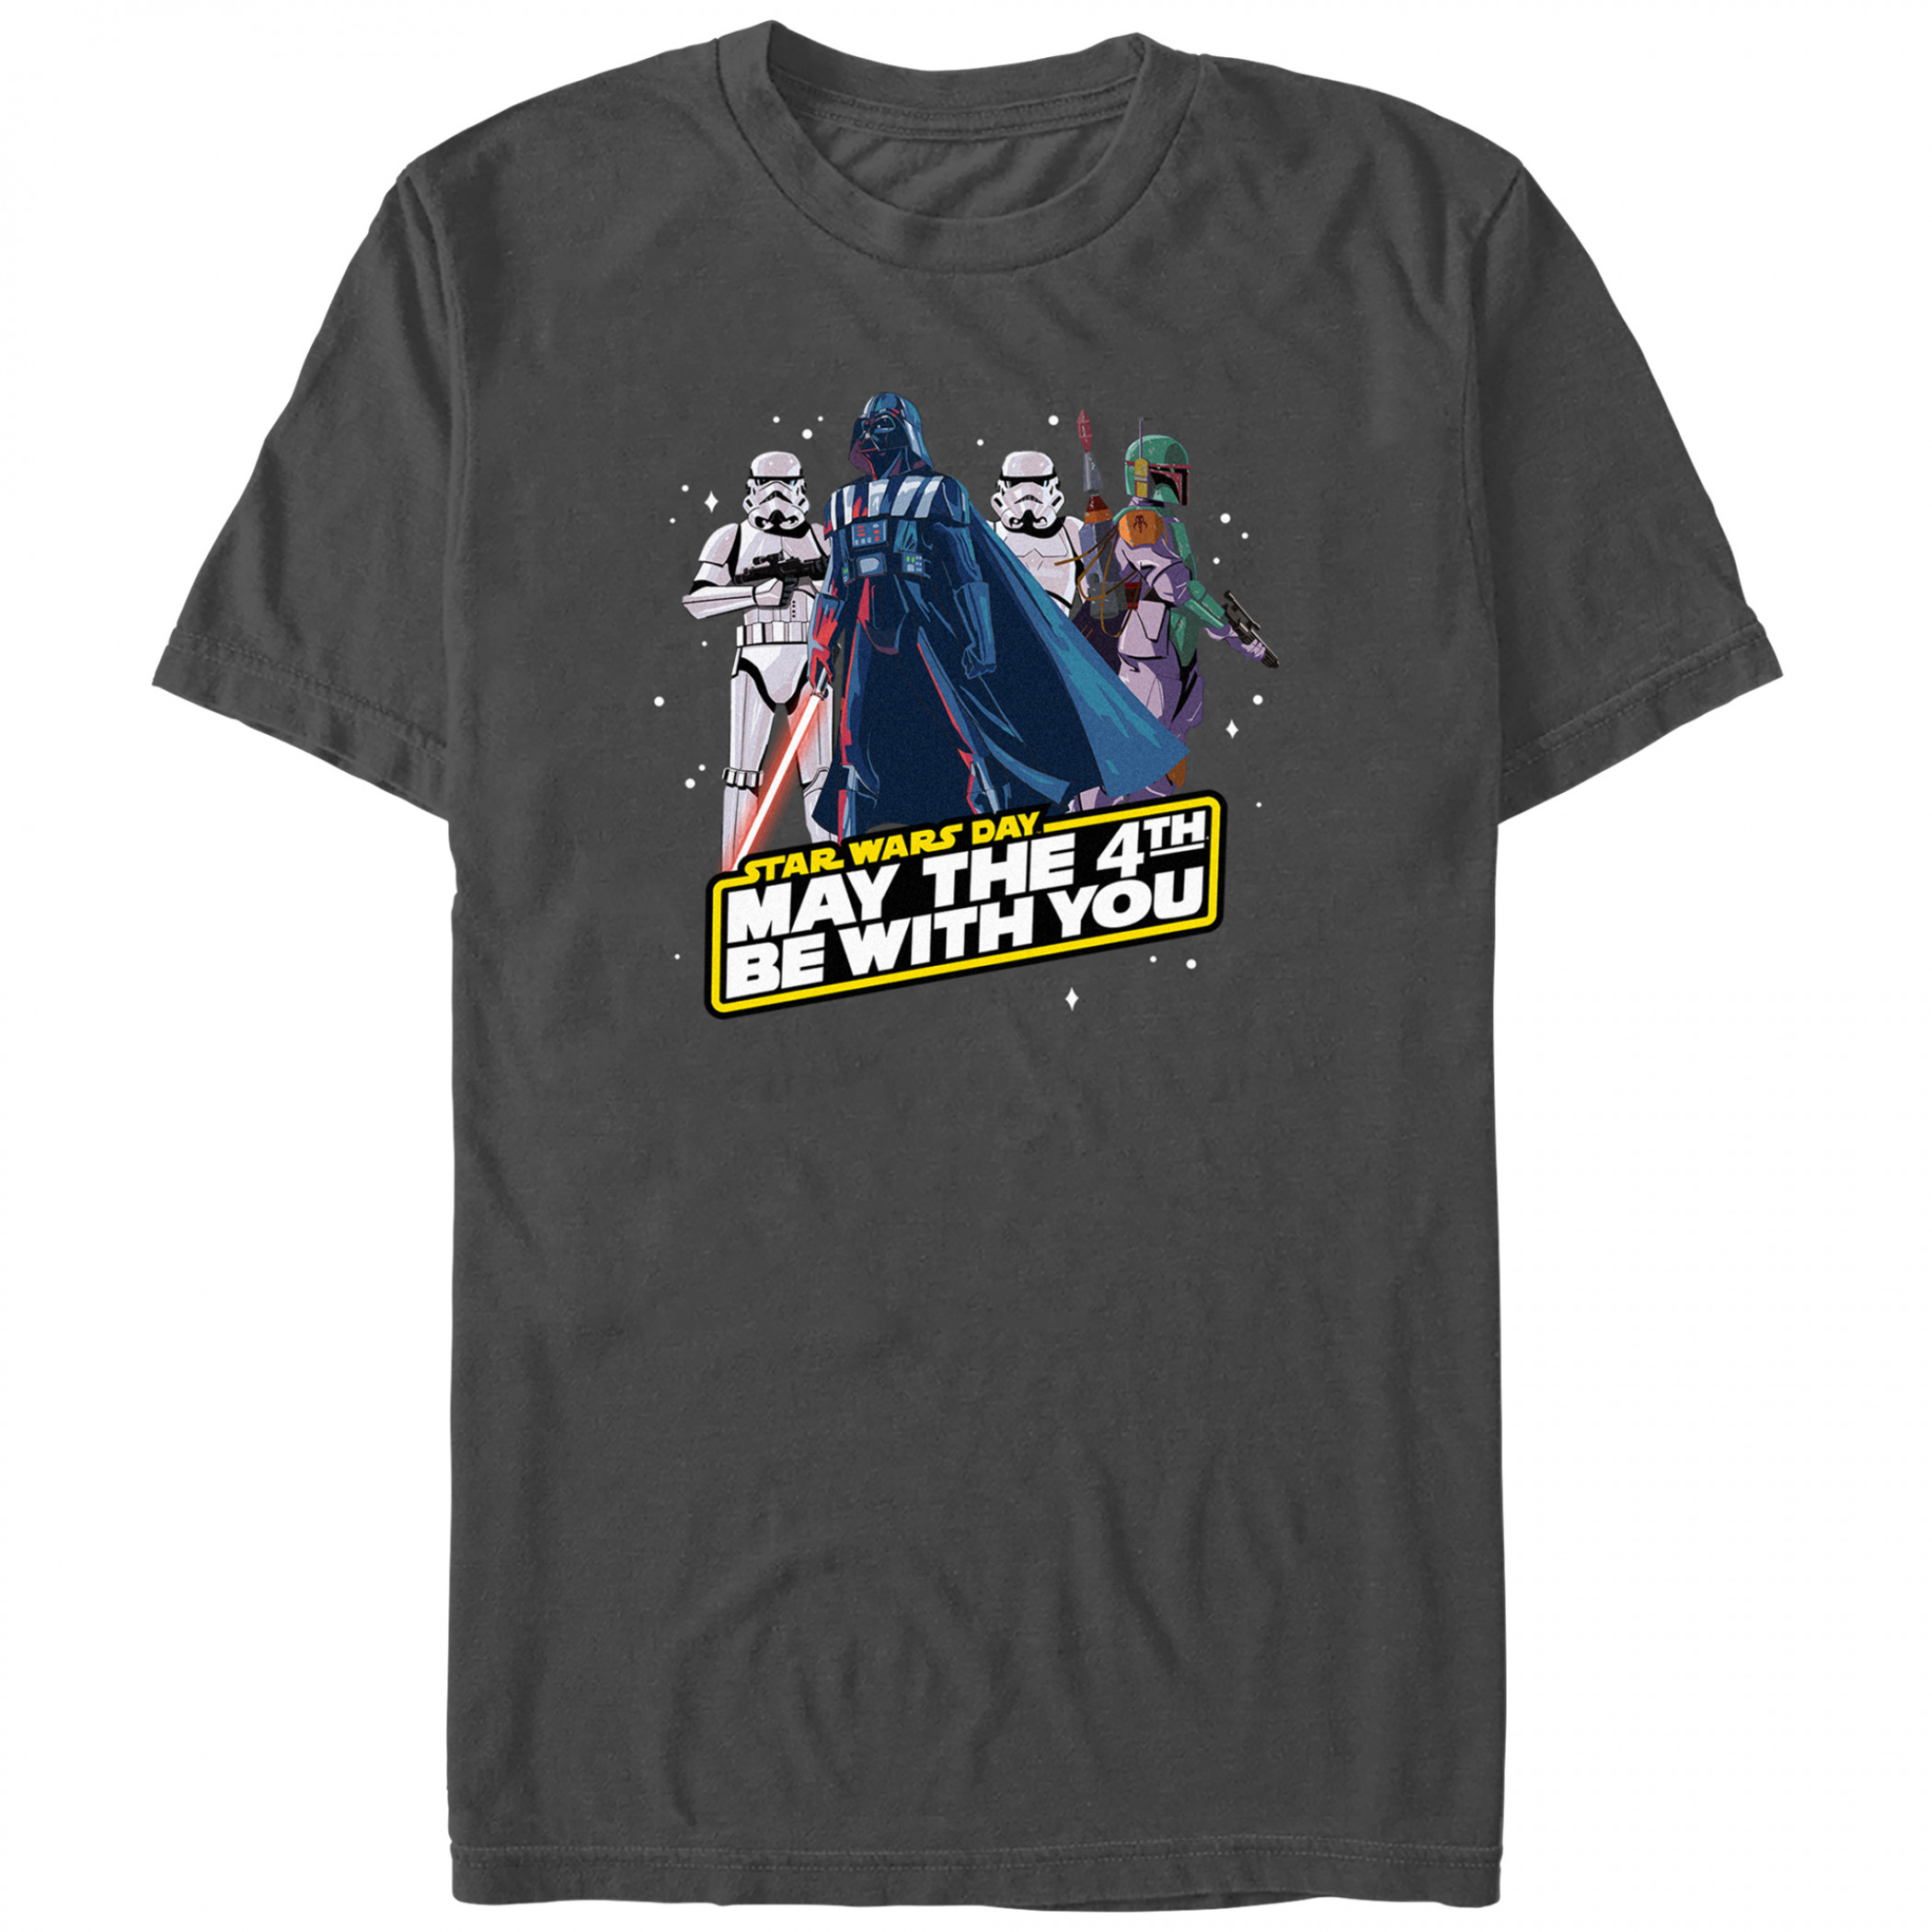 The Empire Strikes Back Star Wars May the Fourth T-Shirt